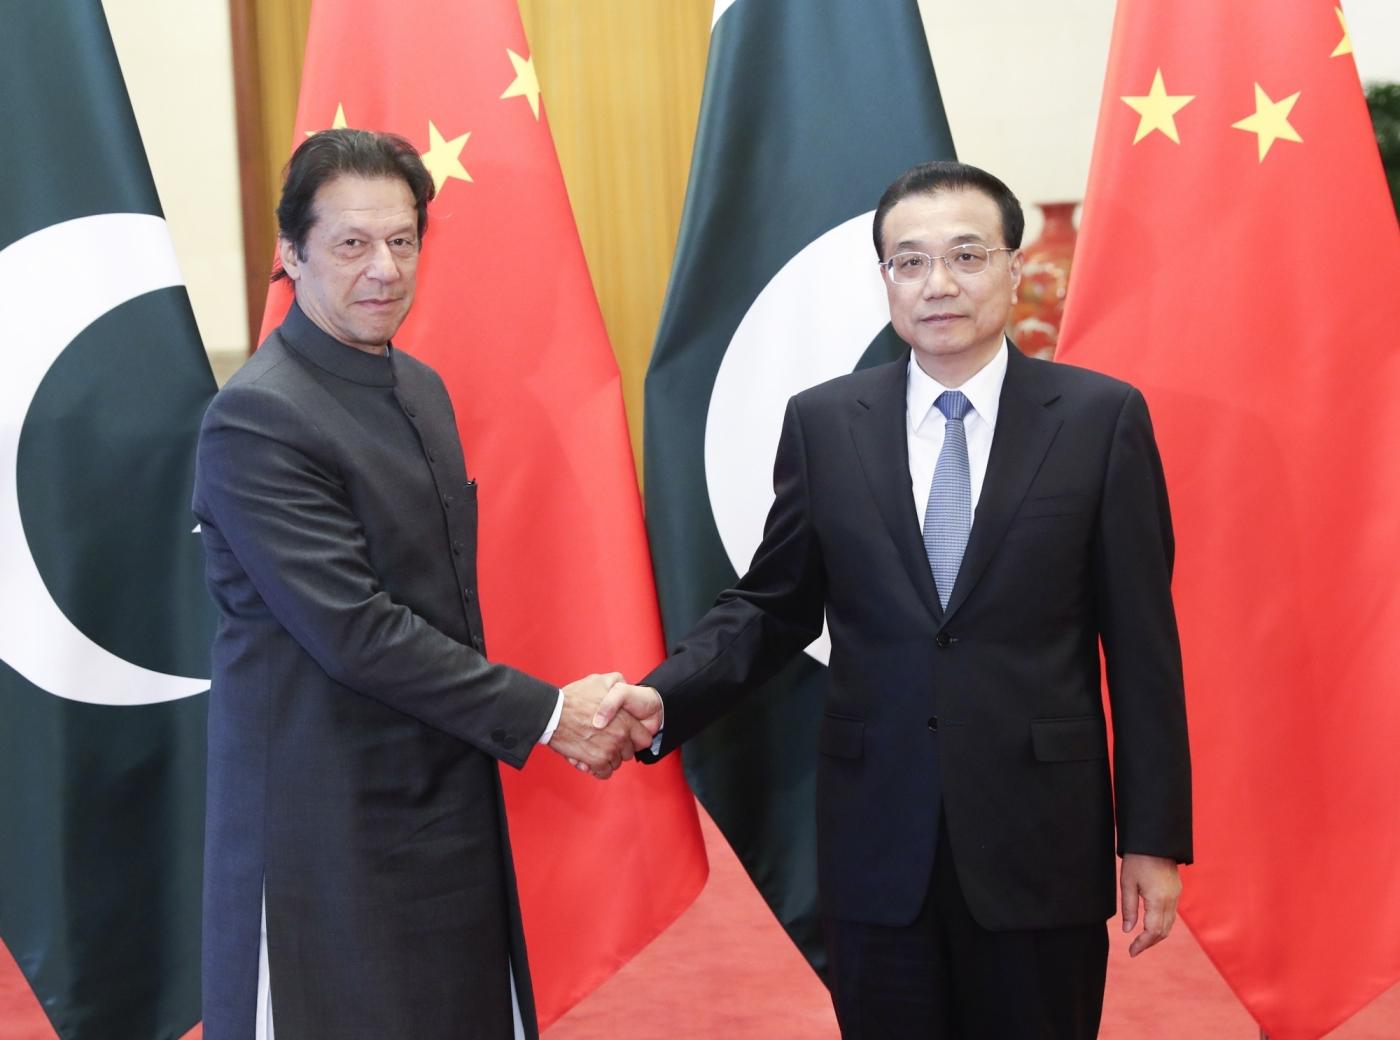 BEIJING, Nov. 3, 2018 (Xinhua) -- Chinese Premier Li Keqiang (R) holds talks with Pakistani Prime Minister Imran Khan, who is paying an official visit to China, at the Great Hall of the People in Beijing, capital of China, Nov. 3, 2018. (Xinhua/Pang Xinglei/IANS) by .